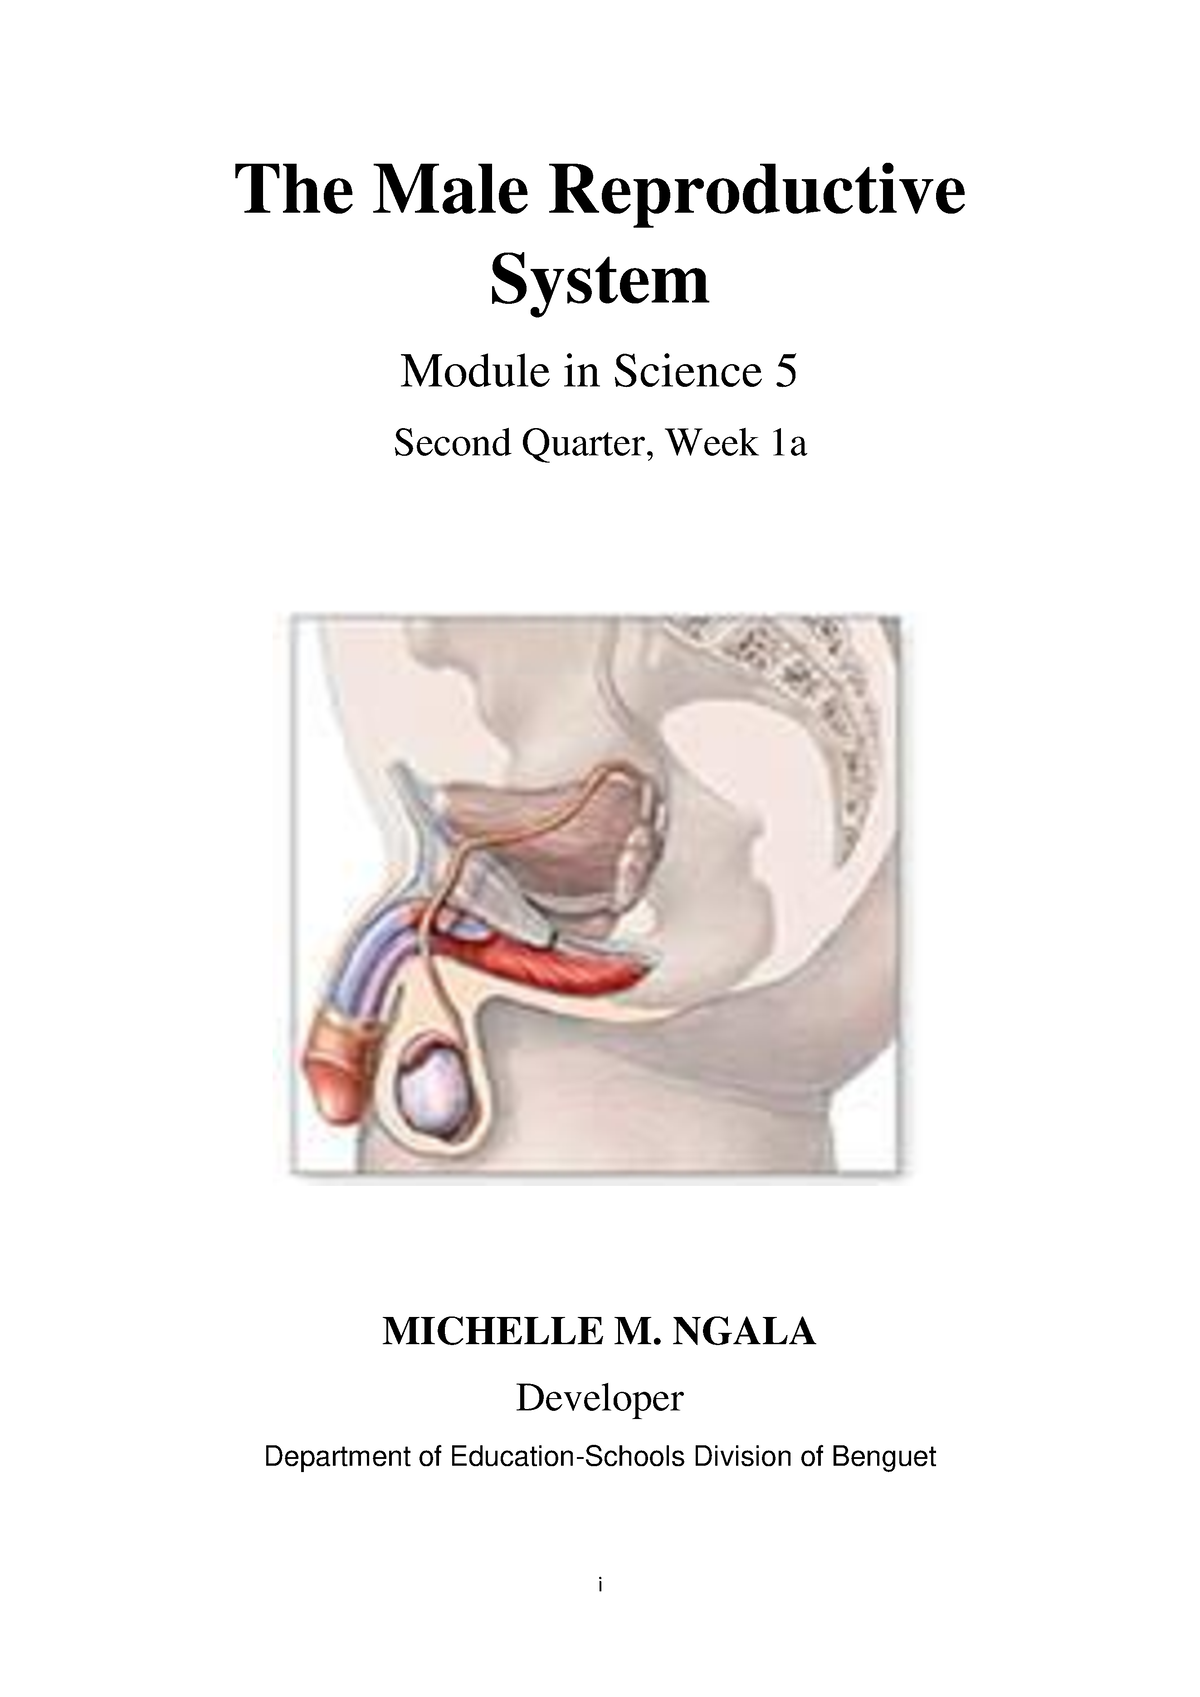 Sci5 Q2 M1 The Male Reproductive System I The Male Reproductive System Module In Science 5 